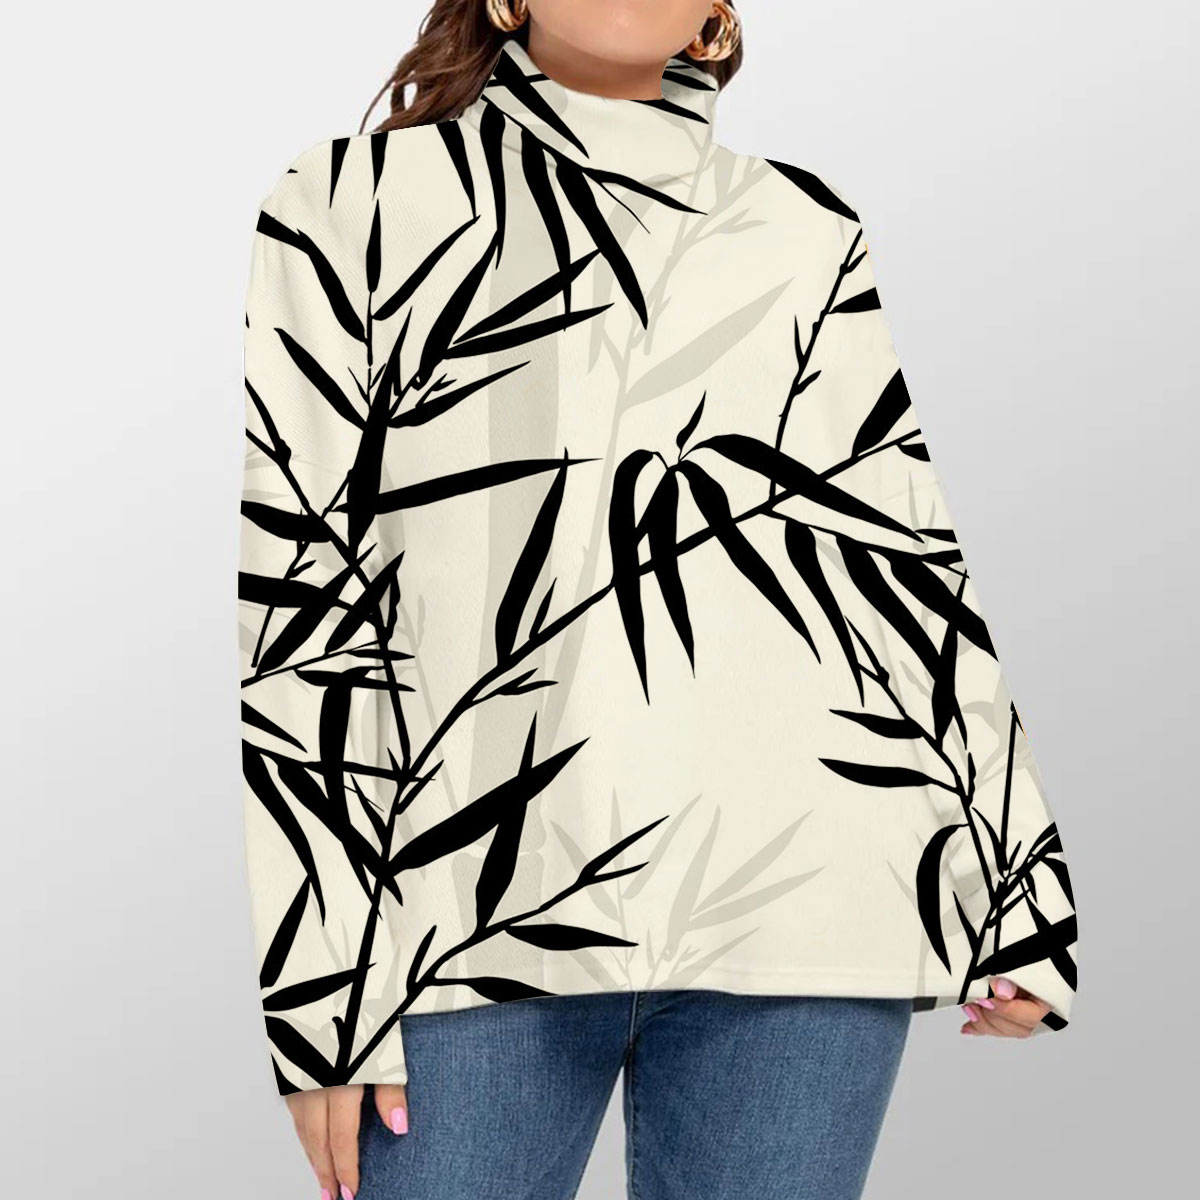 Black And White Bamboo Leaves Turtleneck Sweater